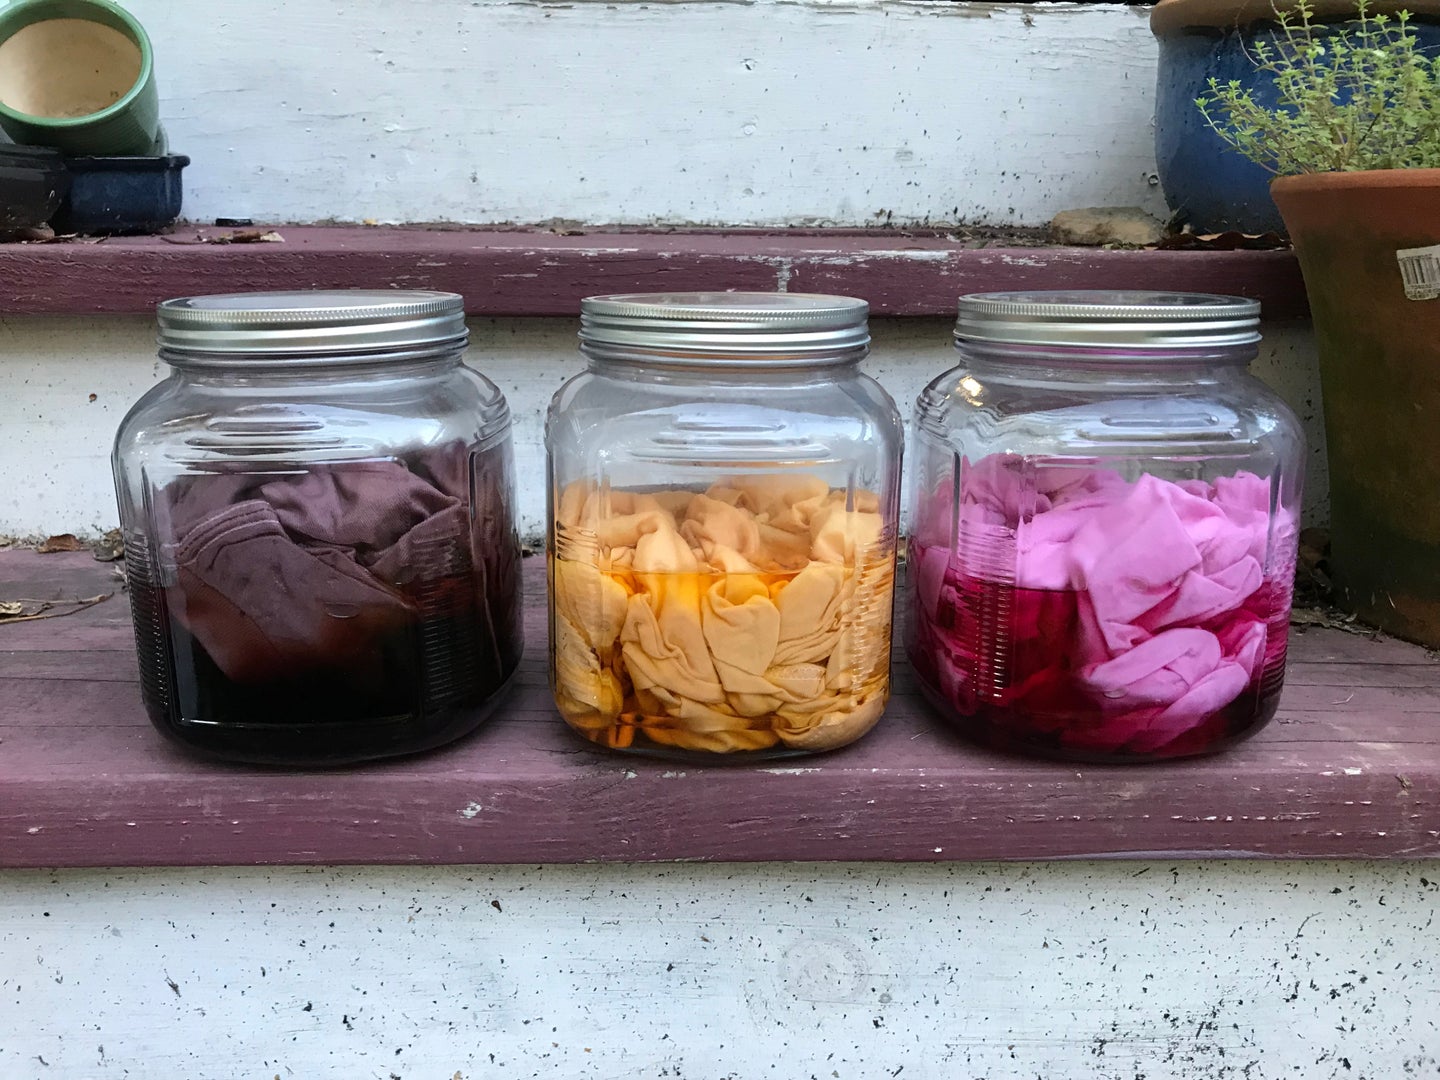 Three mason jars with homemade fabric dye and some dyed shirts inside them. From left to right: purple, orange, and pink.